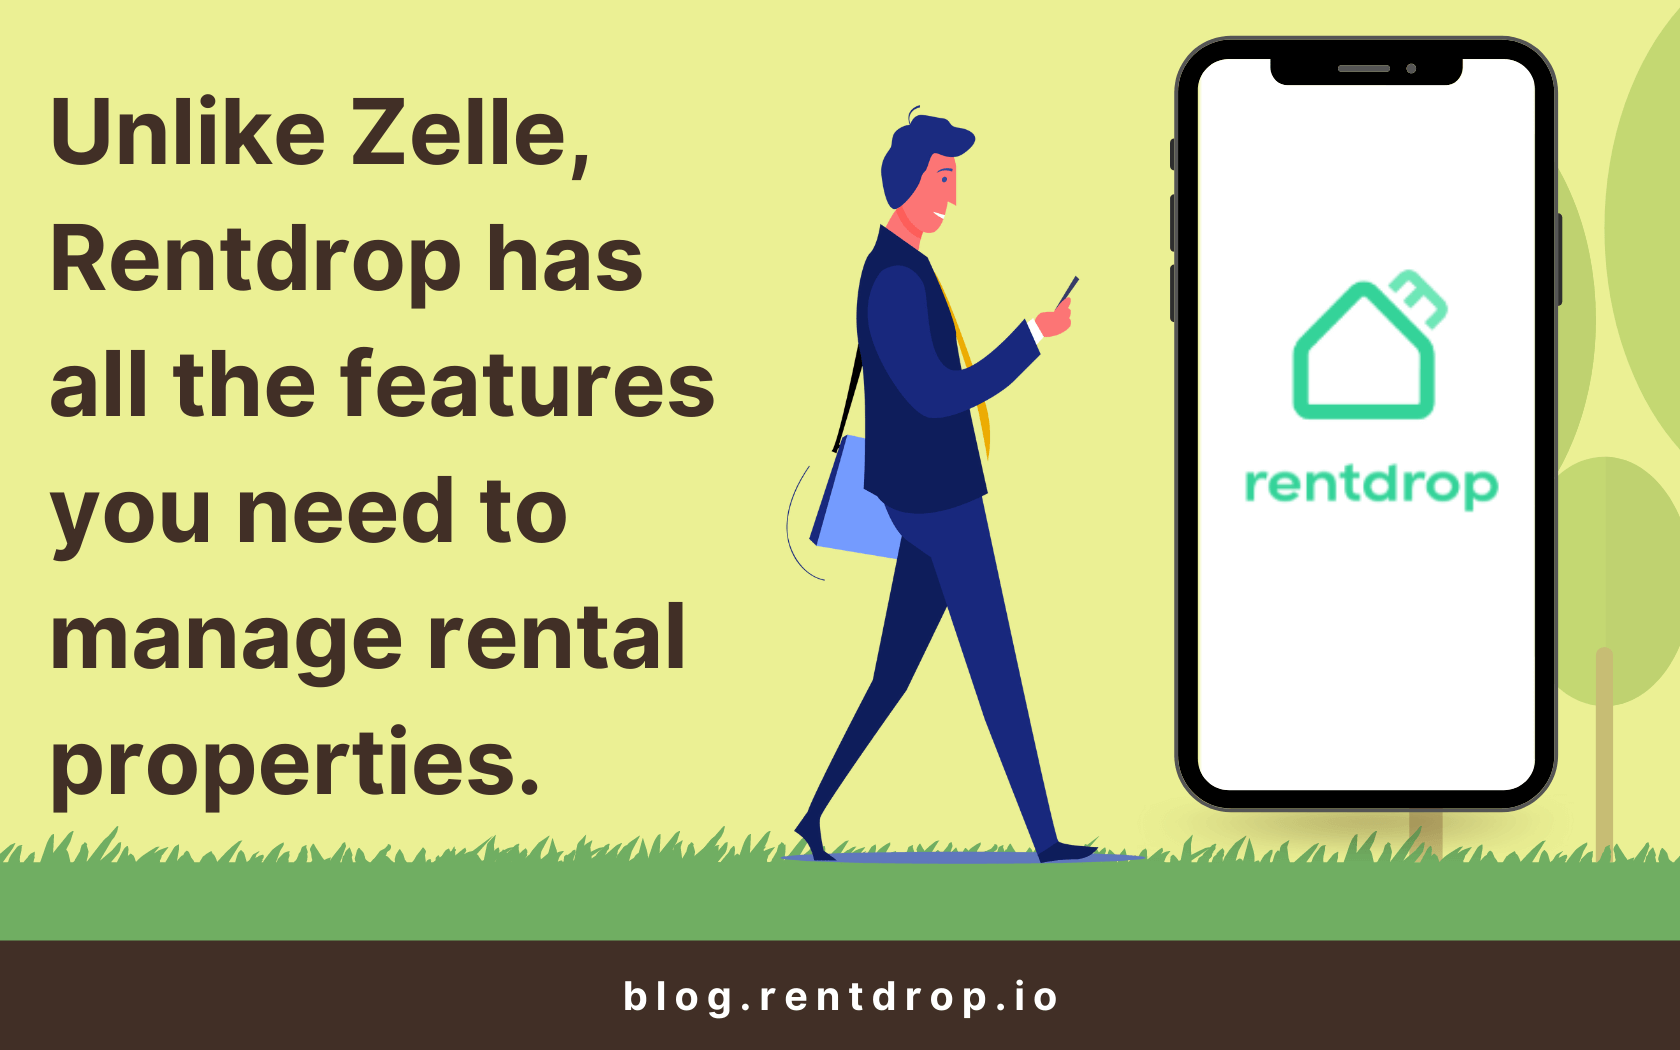 zelle fees for rent rayments rentdrop asset